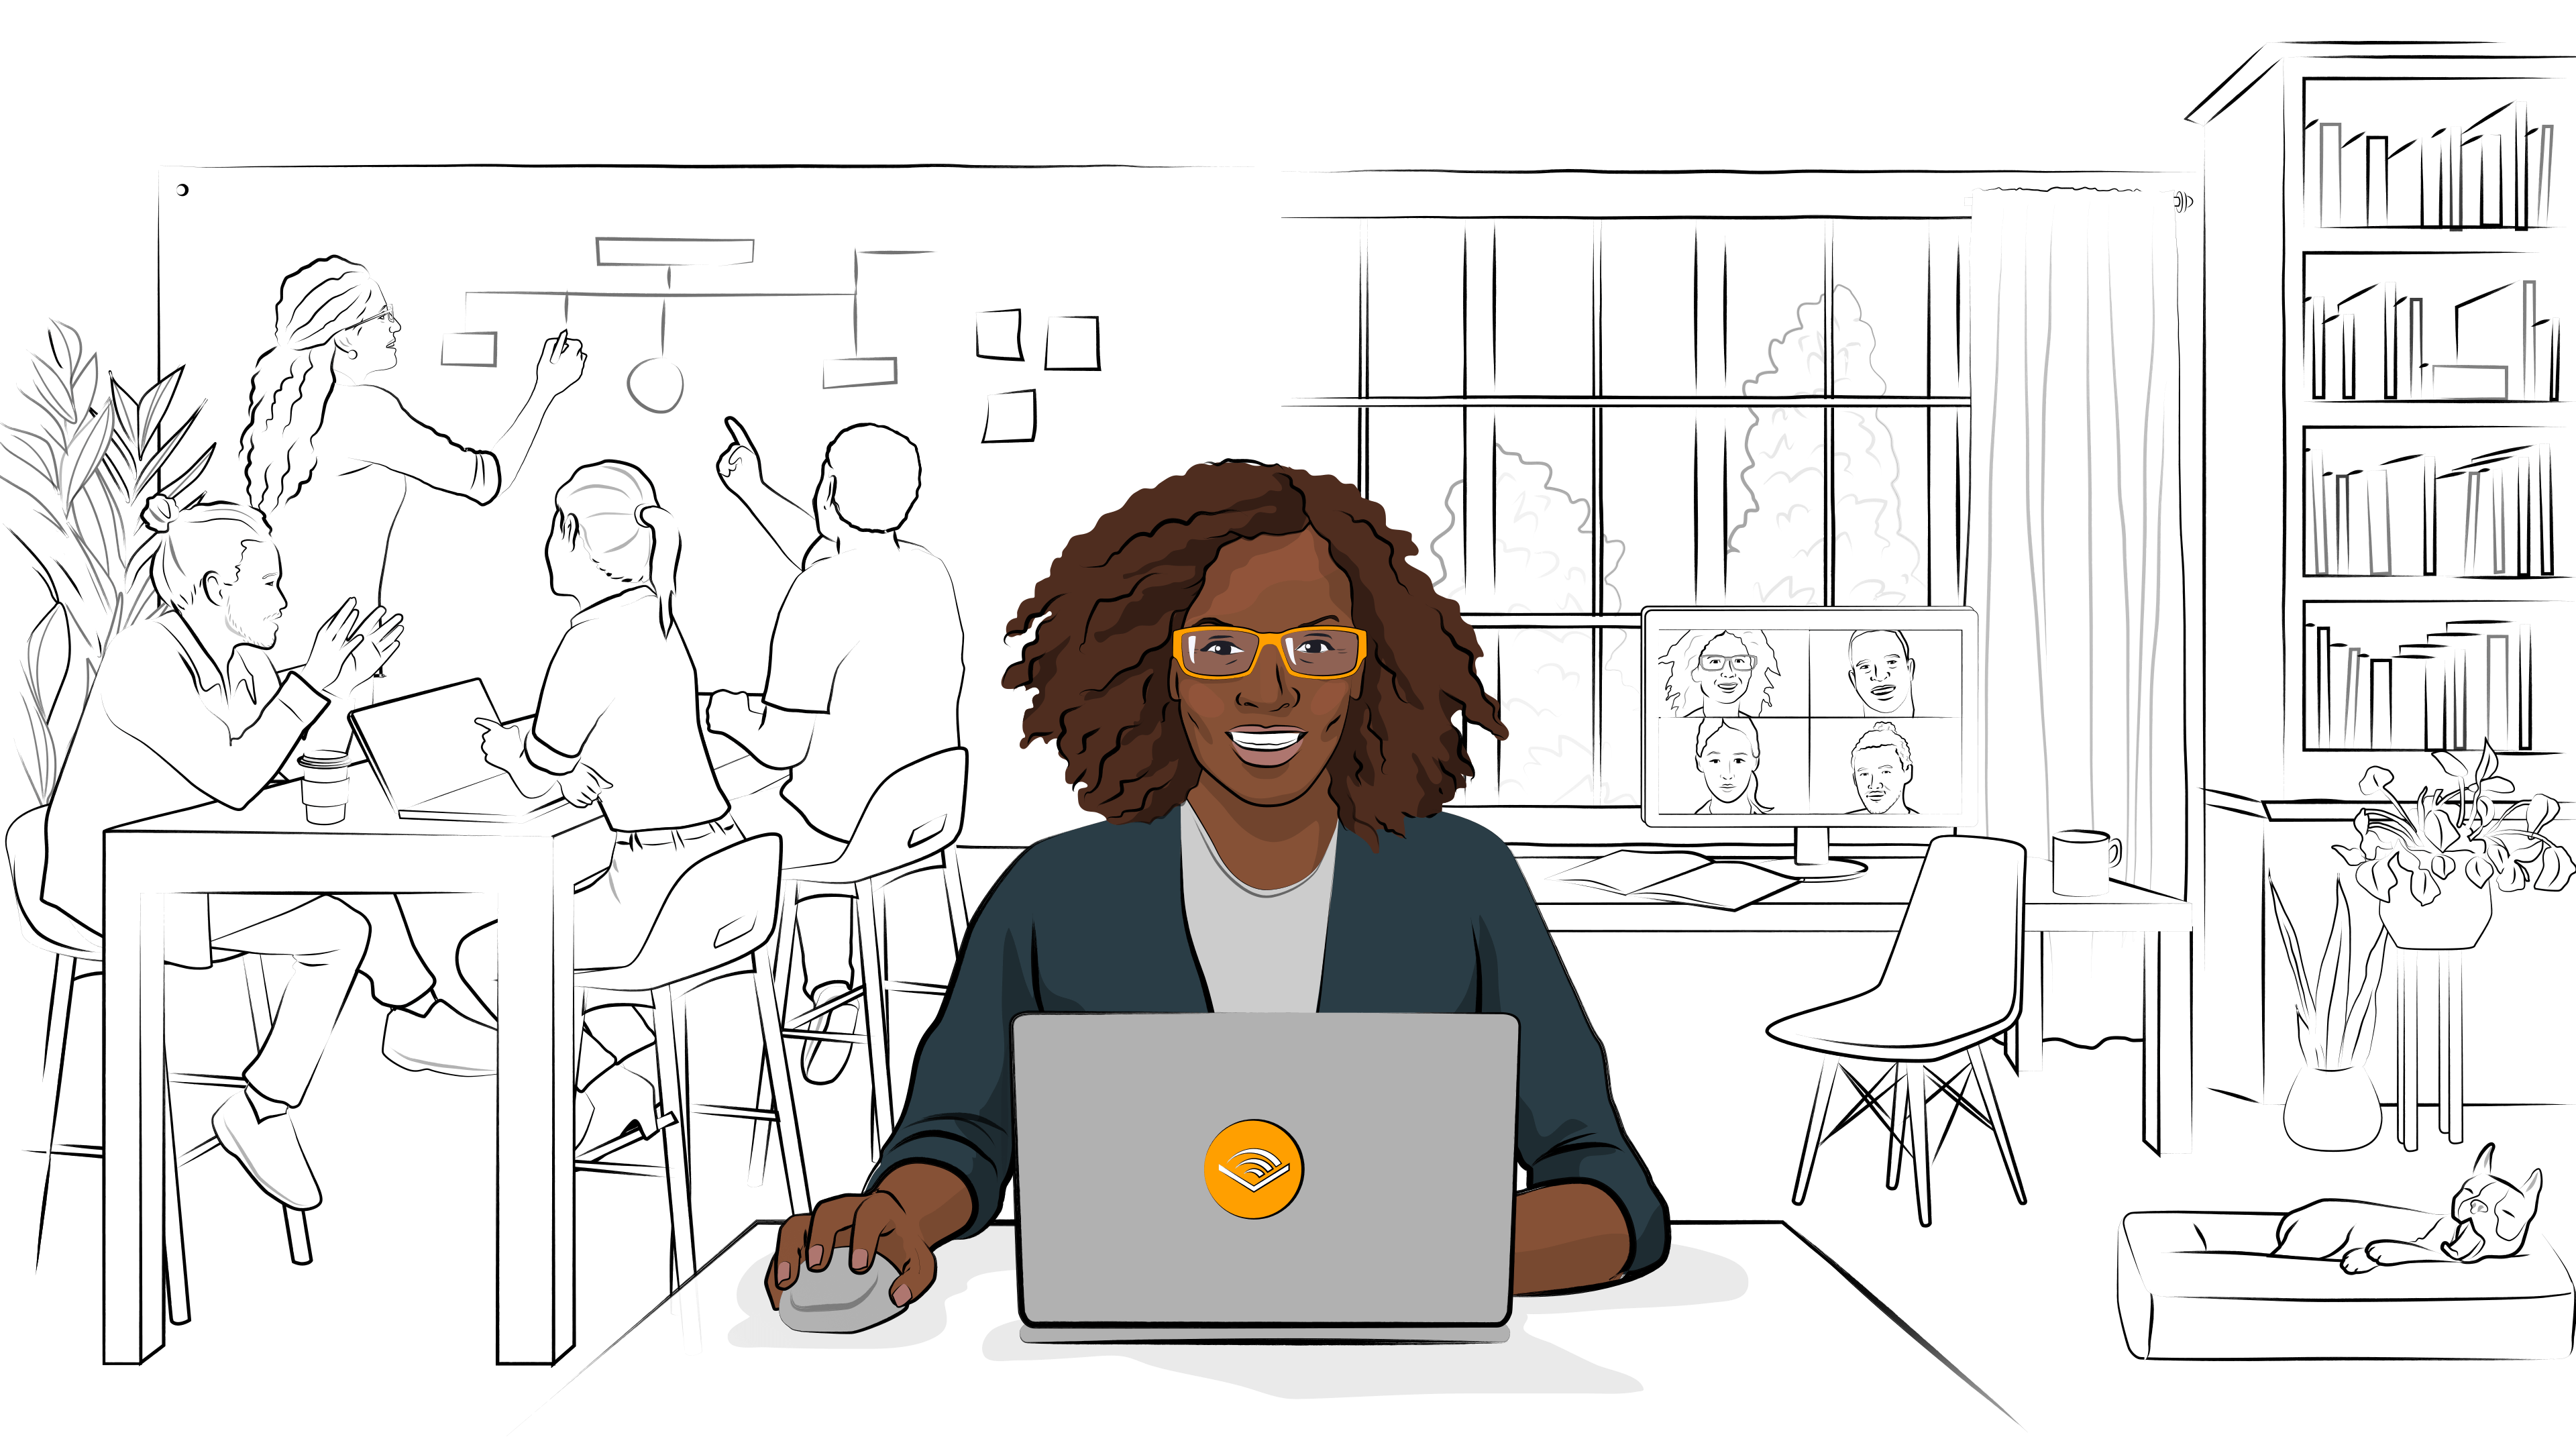 Cartoon image of a young woman working at her laptop